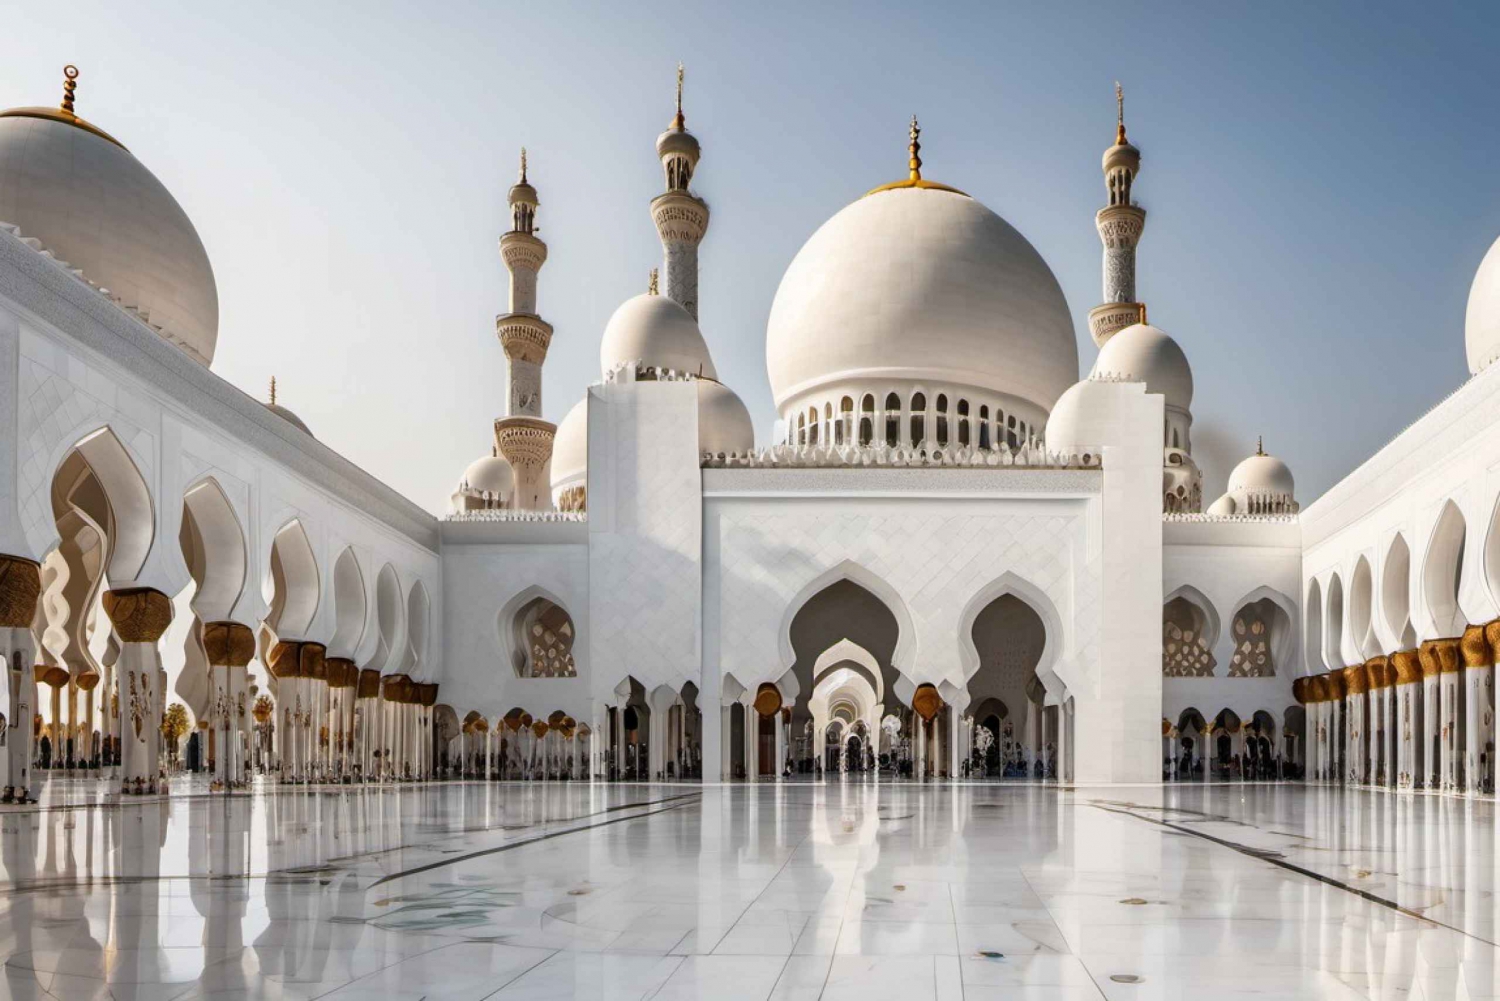 Dubai: Abu Dhabi Full Day City Sightseeing Tour with Mosque